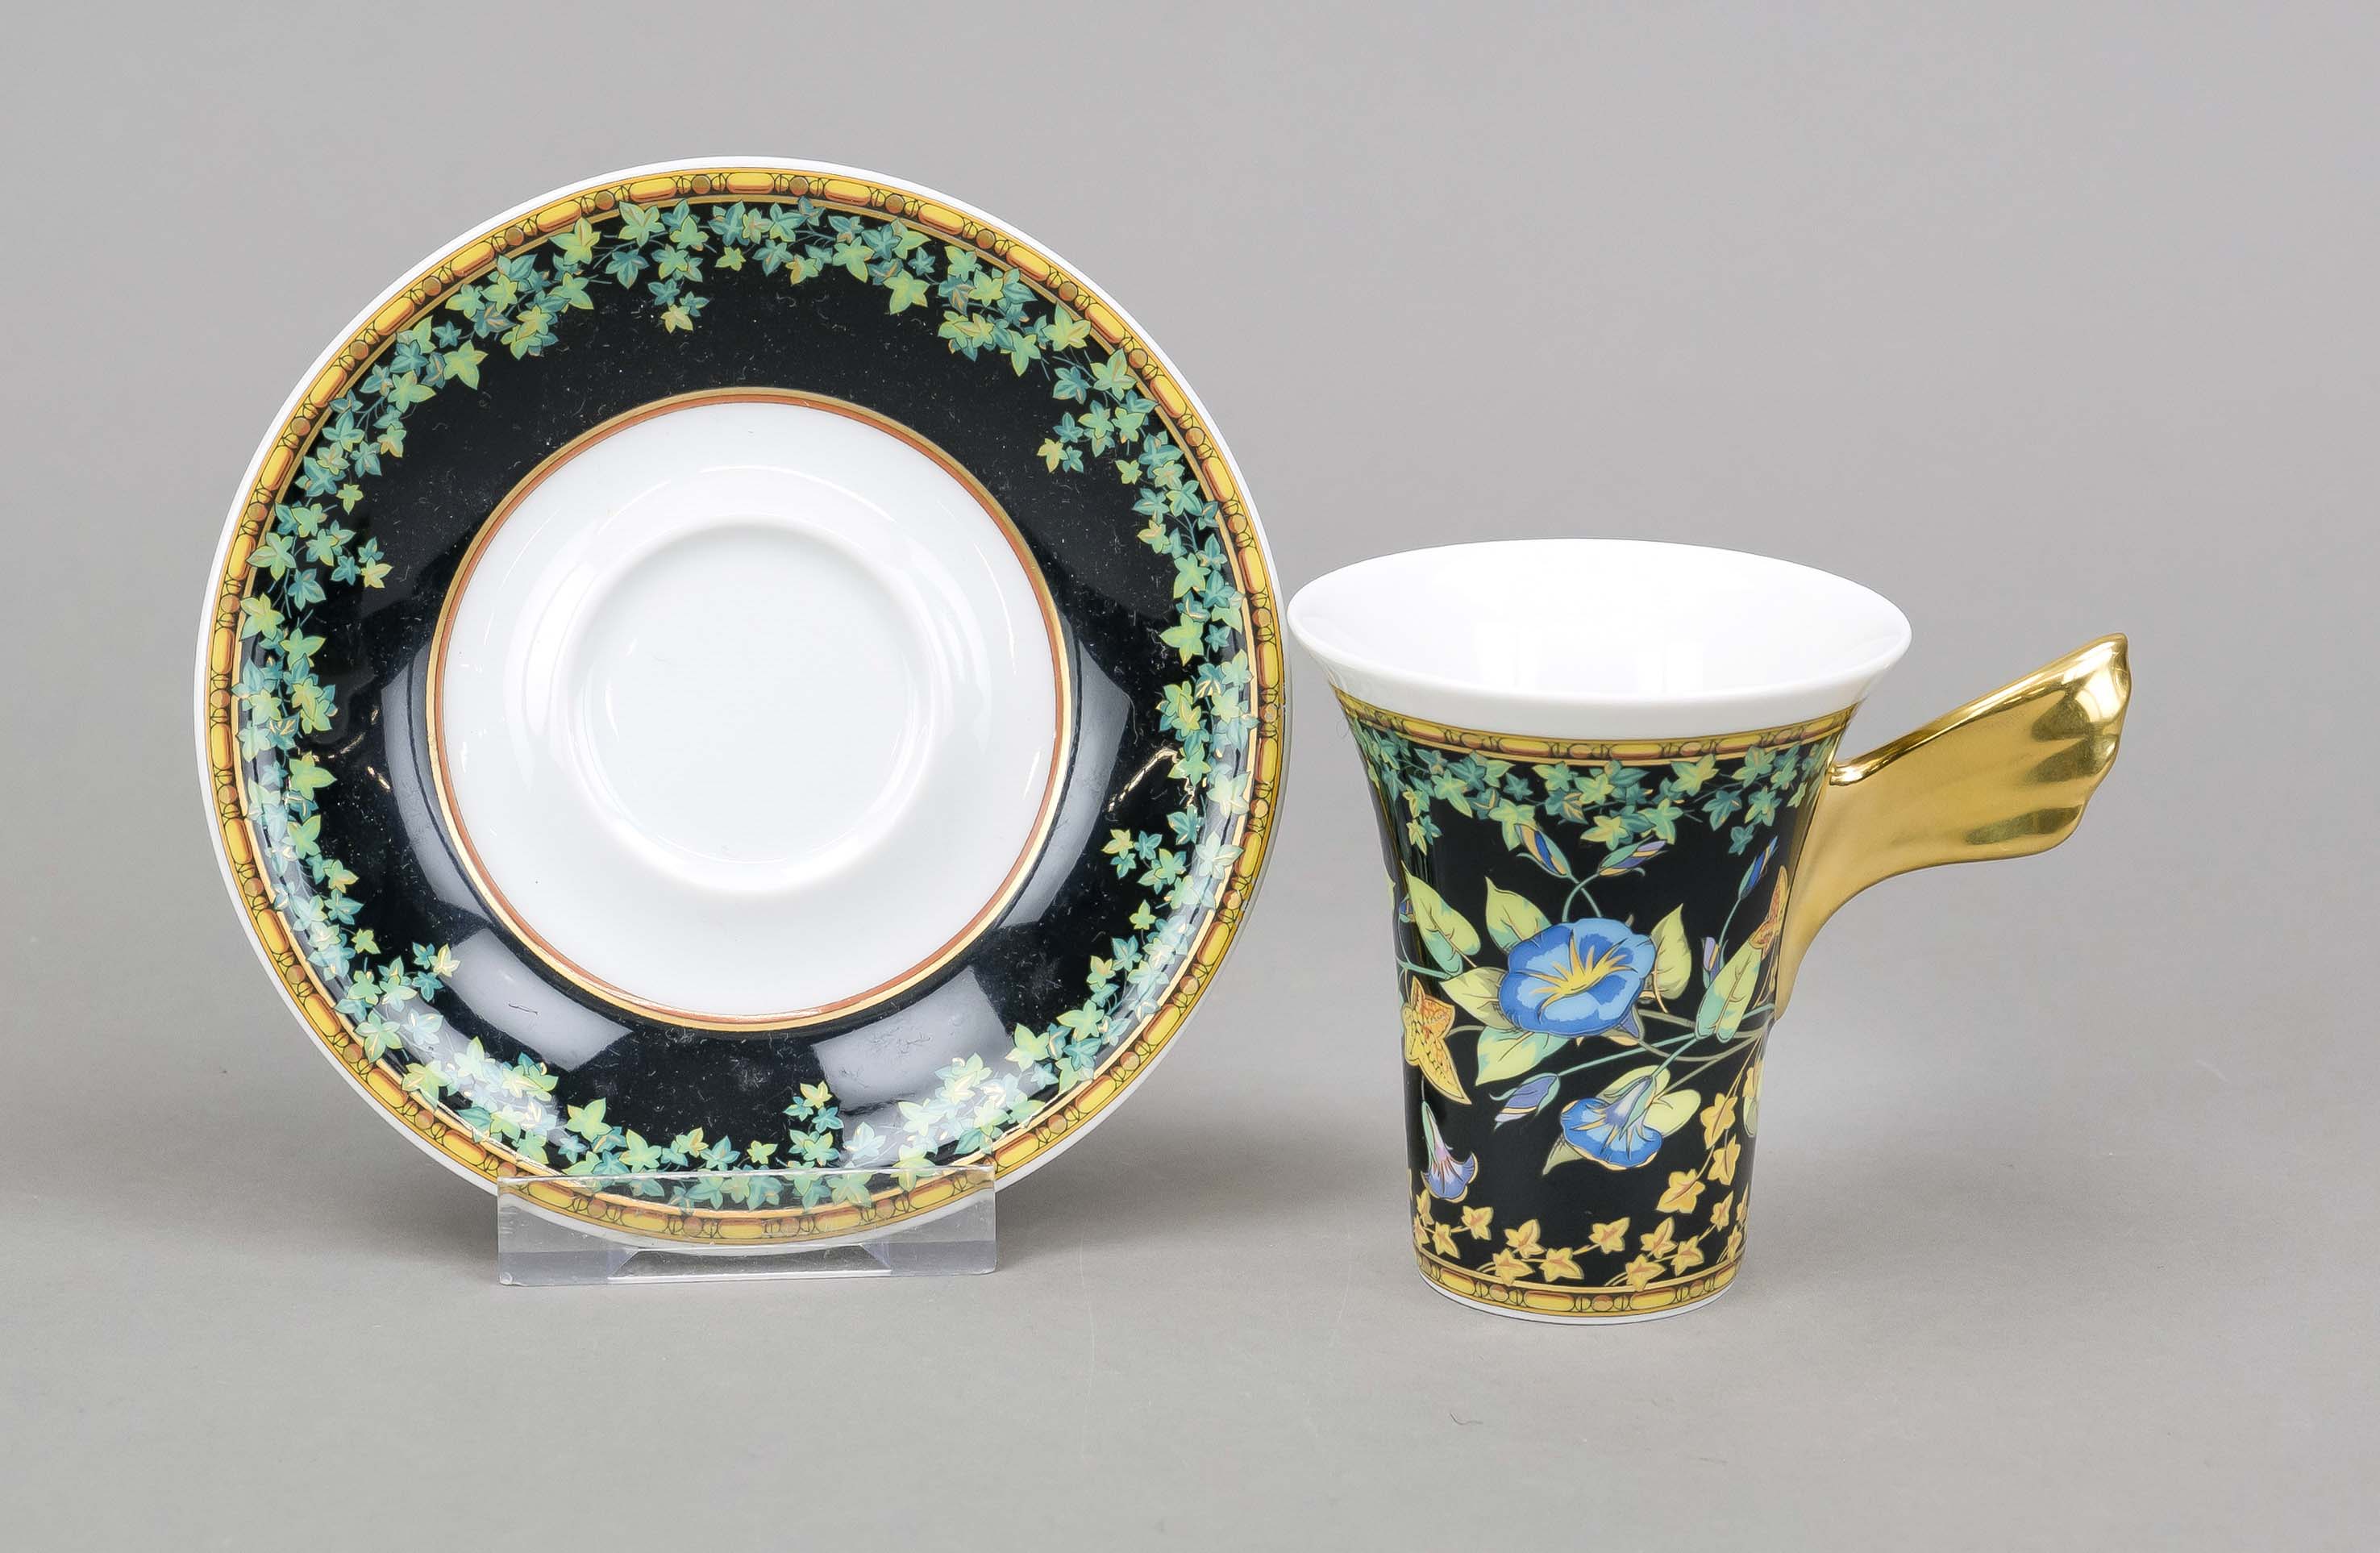 Demitasse cup with saucer, Rosenthal, late 20th century, Versace design, Icarus shape, Paul